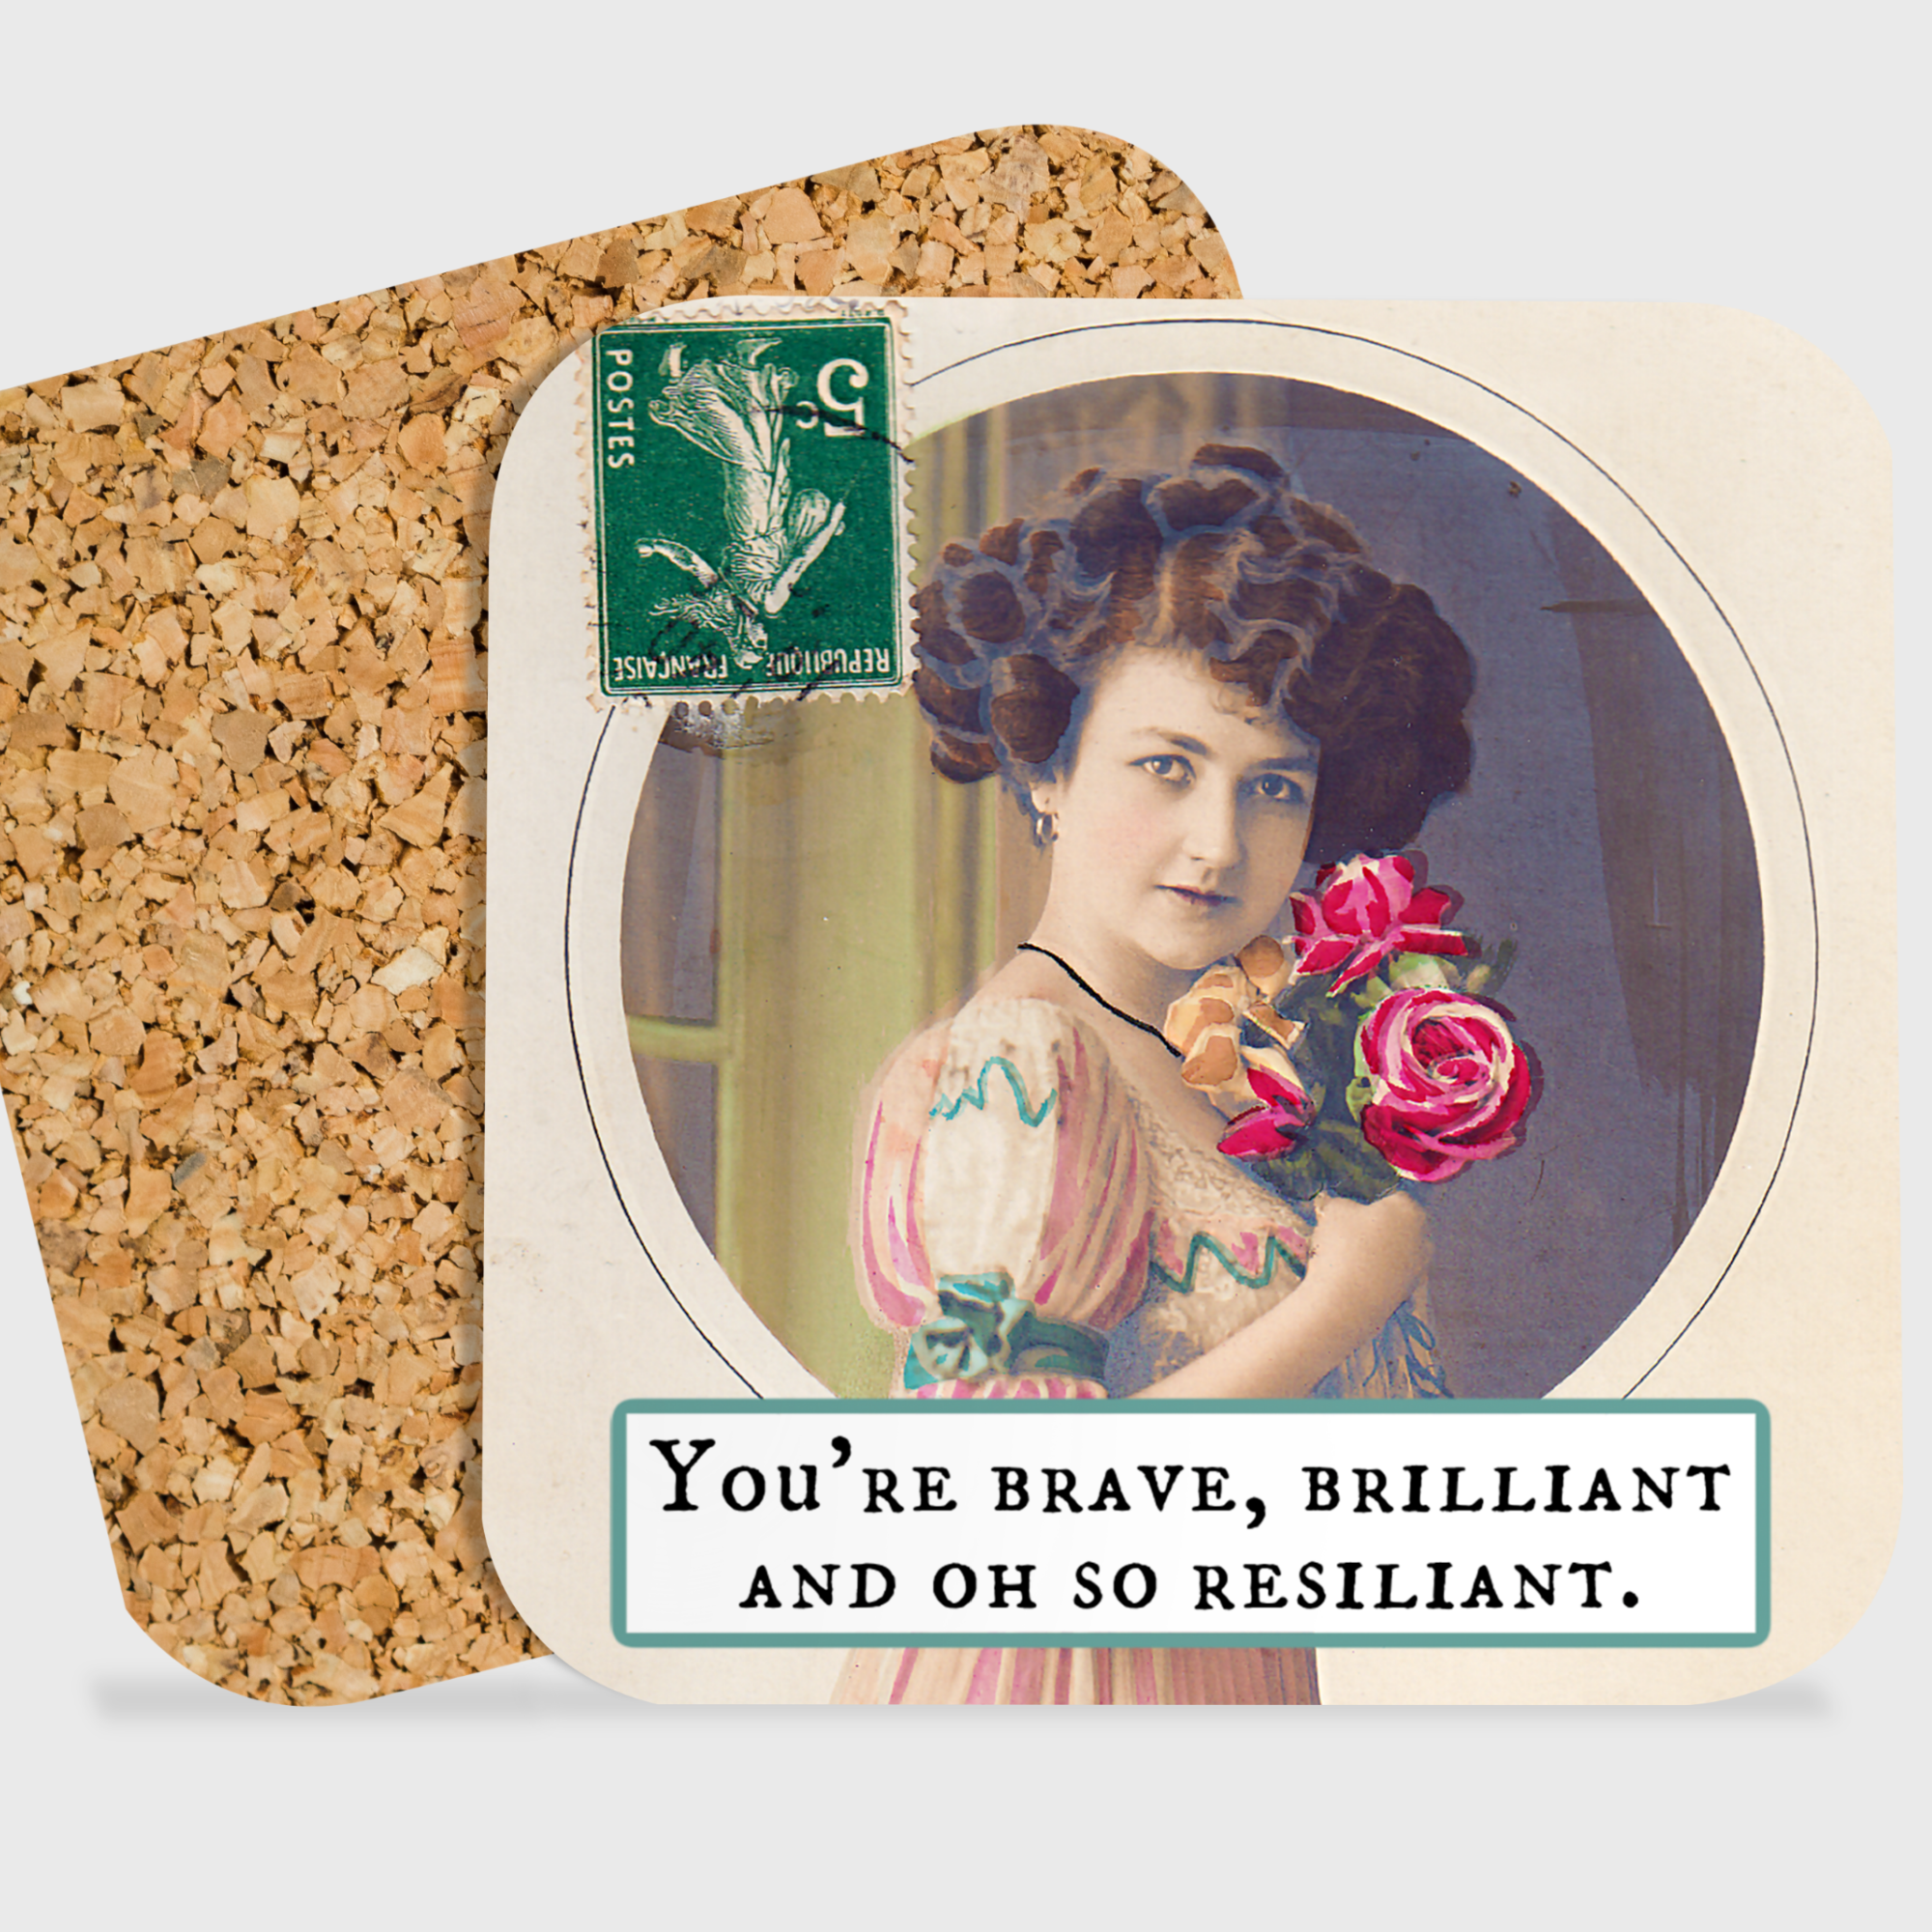 COASTER. You're Brave, Brilliant and Oh So Resilient.